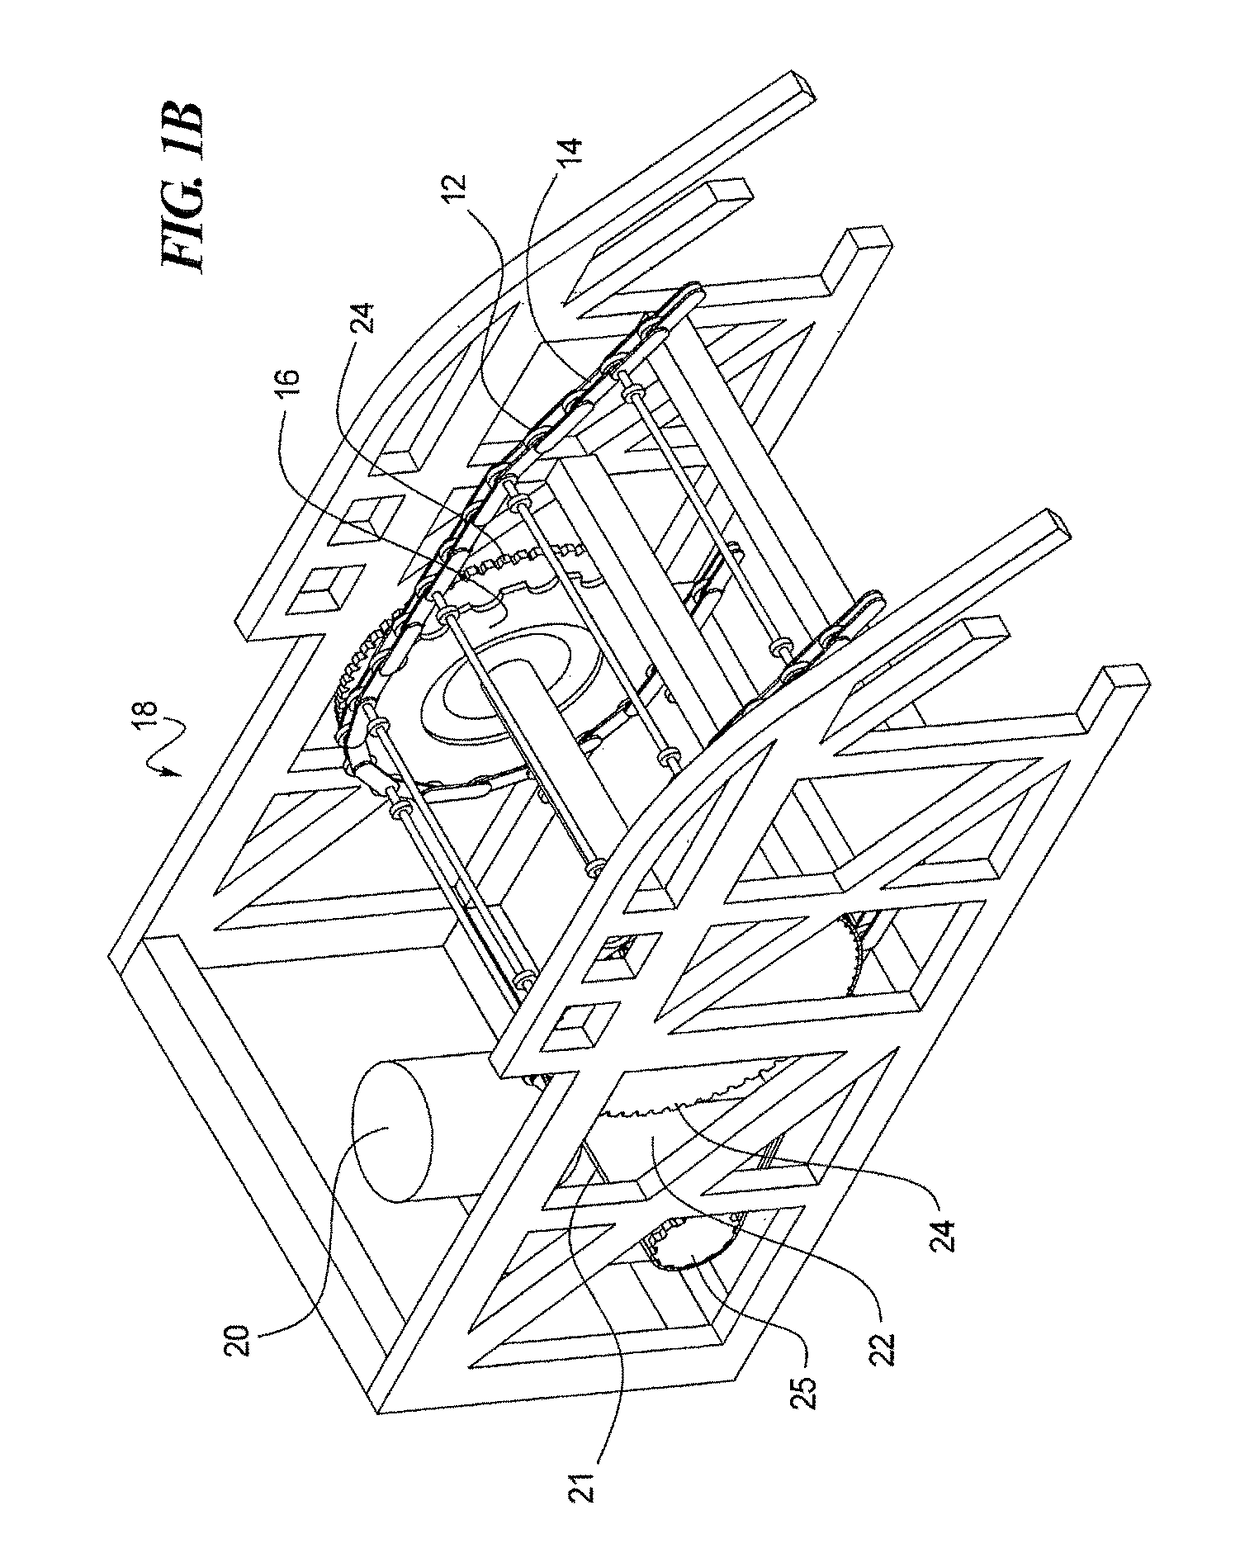 Polygon compensation coupling for chain and sprocket driven systems